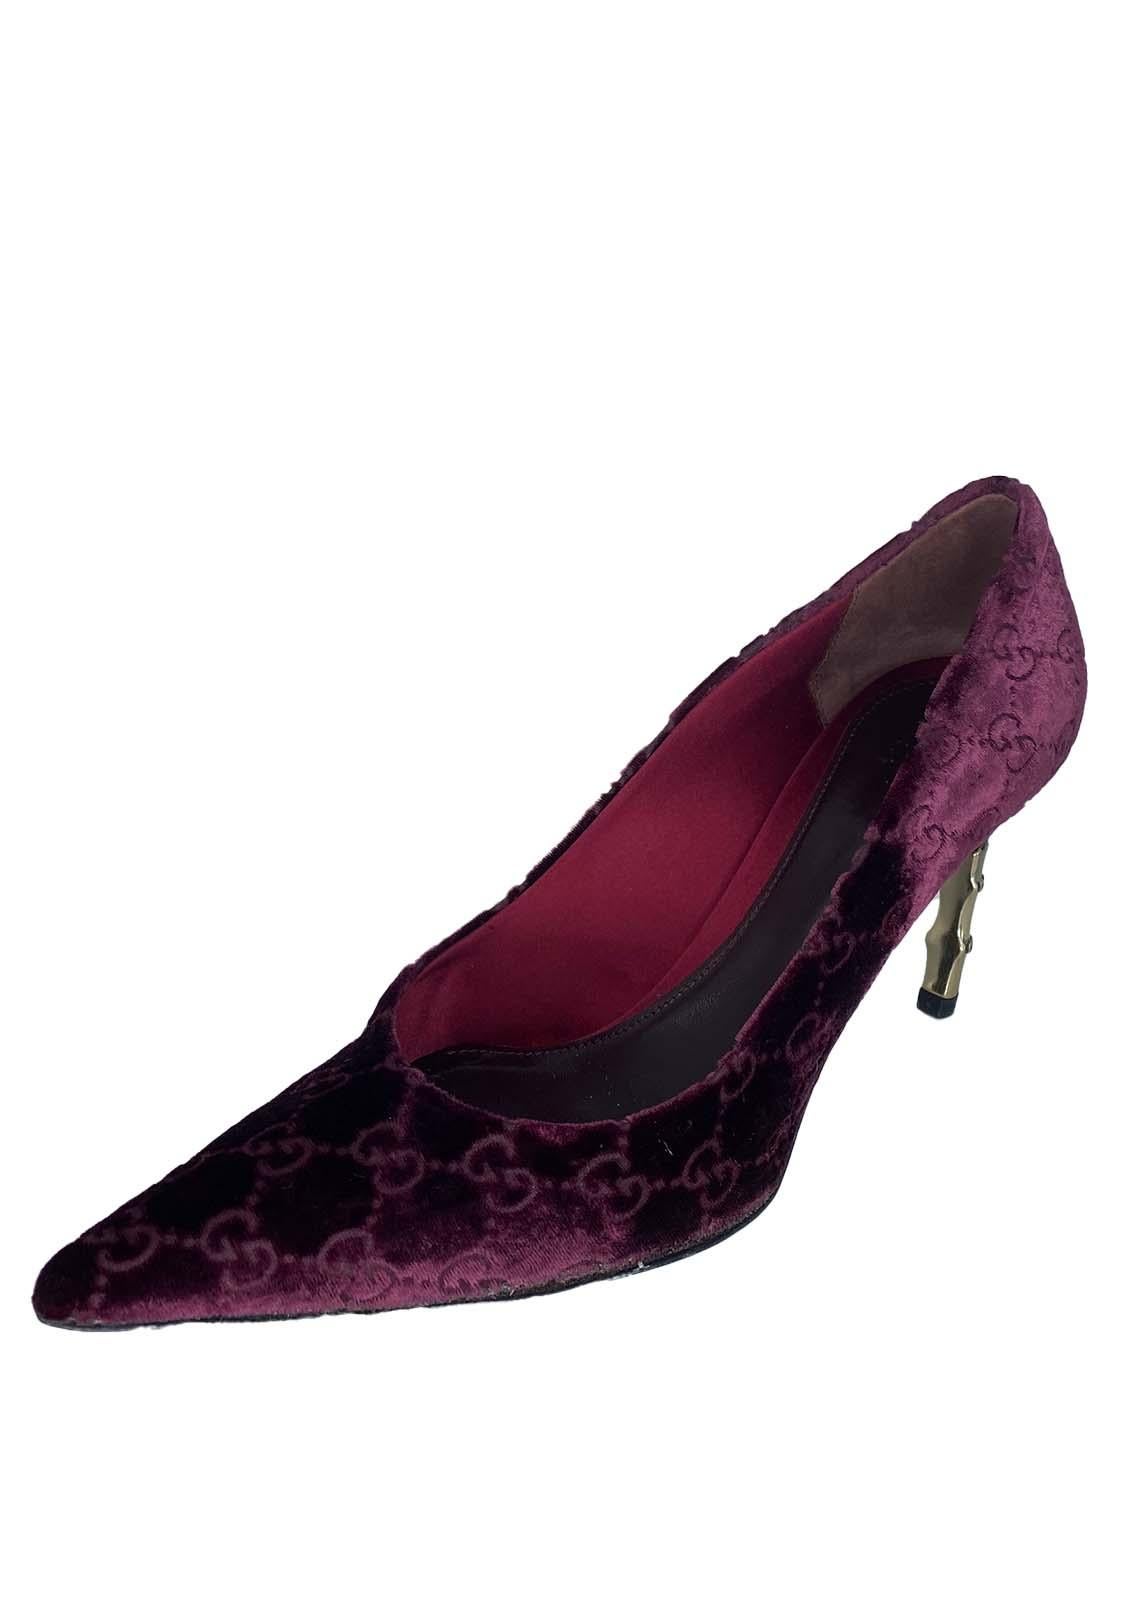 TheRealList presents: a pair incredible burgundy velvet 'GG' Gucci Shoes, designed by Tom Ford. These shoes were designed for the F/W 2004 collection, which was Tom Ford's last at Gucci. The heels are constructed of a small metal bamboo piece with a